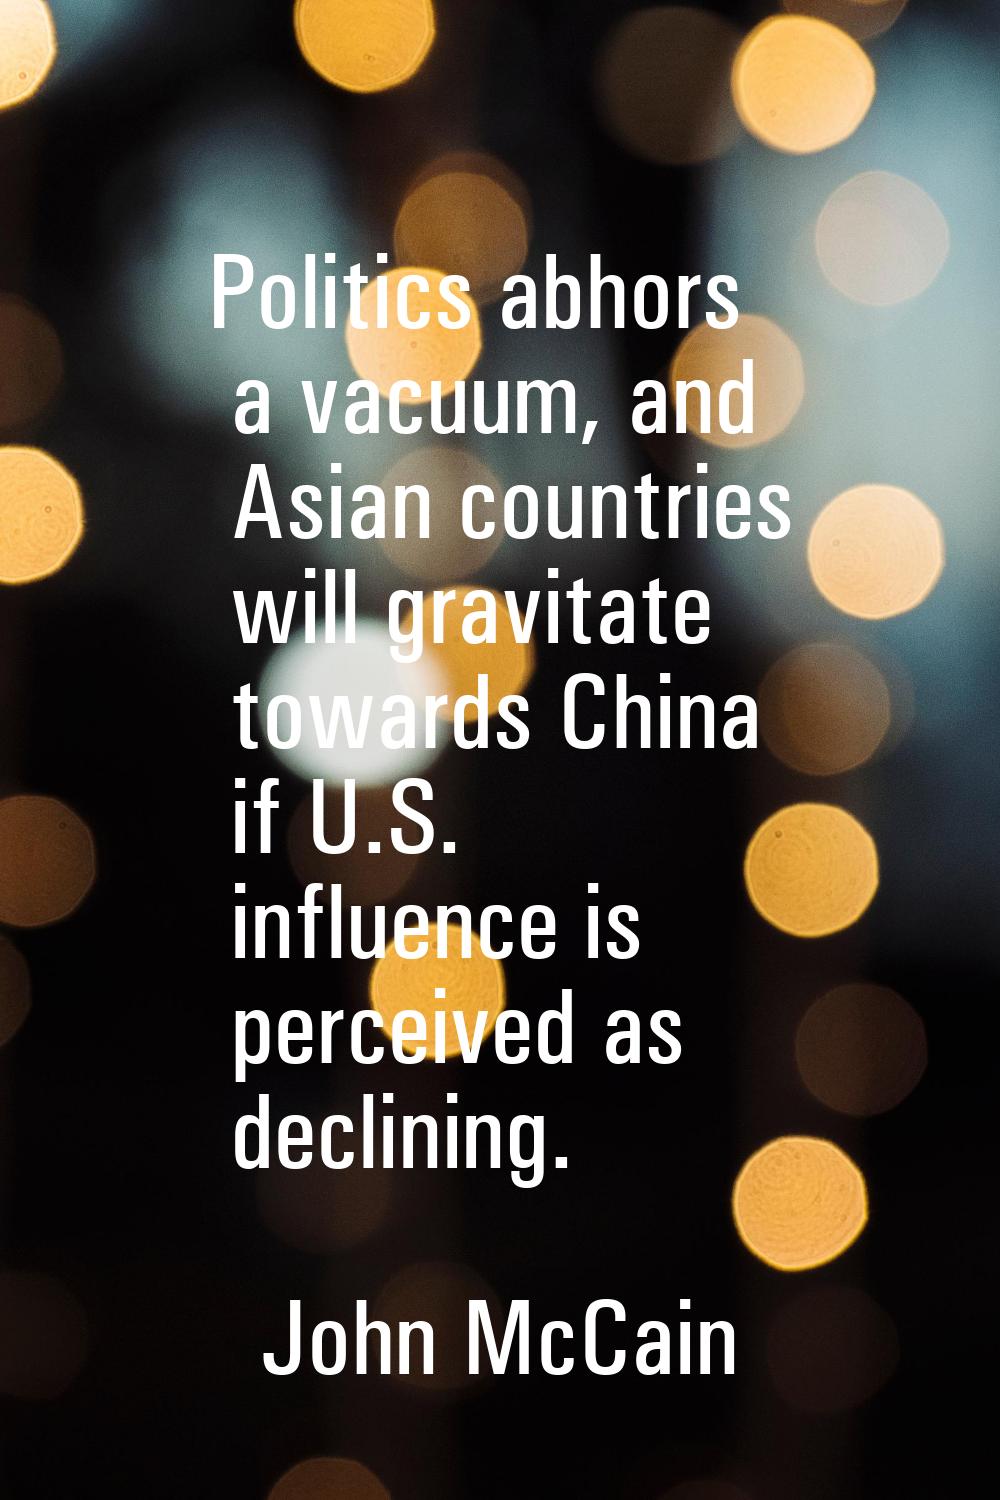 Politics abhors a vacuum, and Asian countries will gravitate towards China if U.S. influence is per